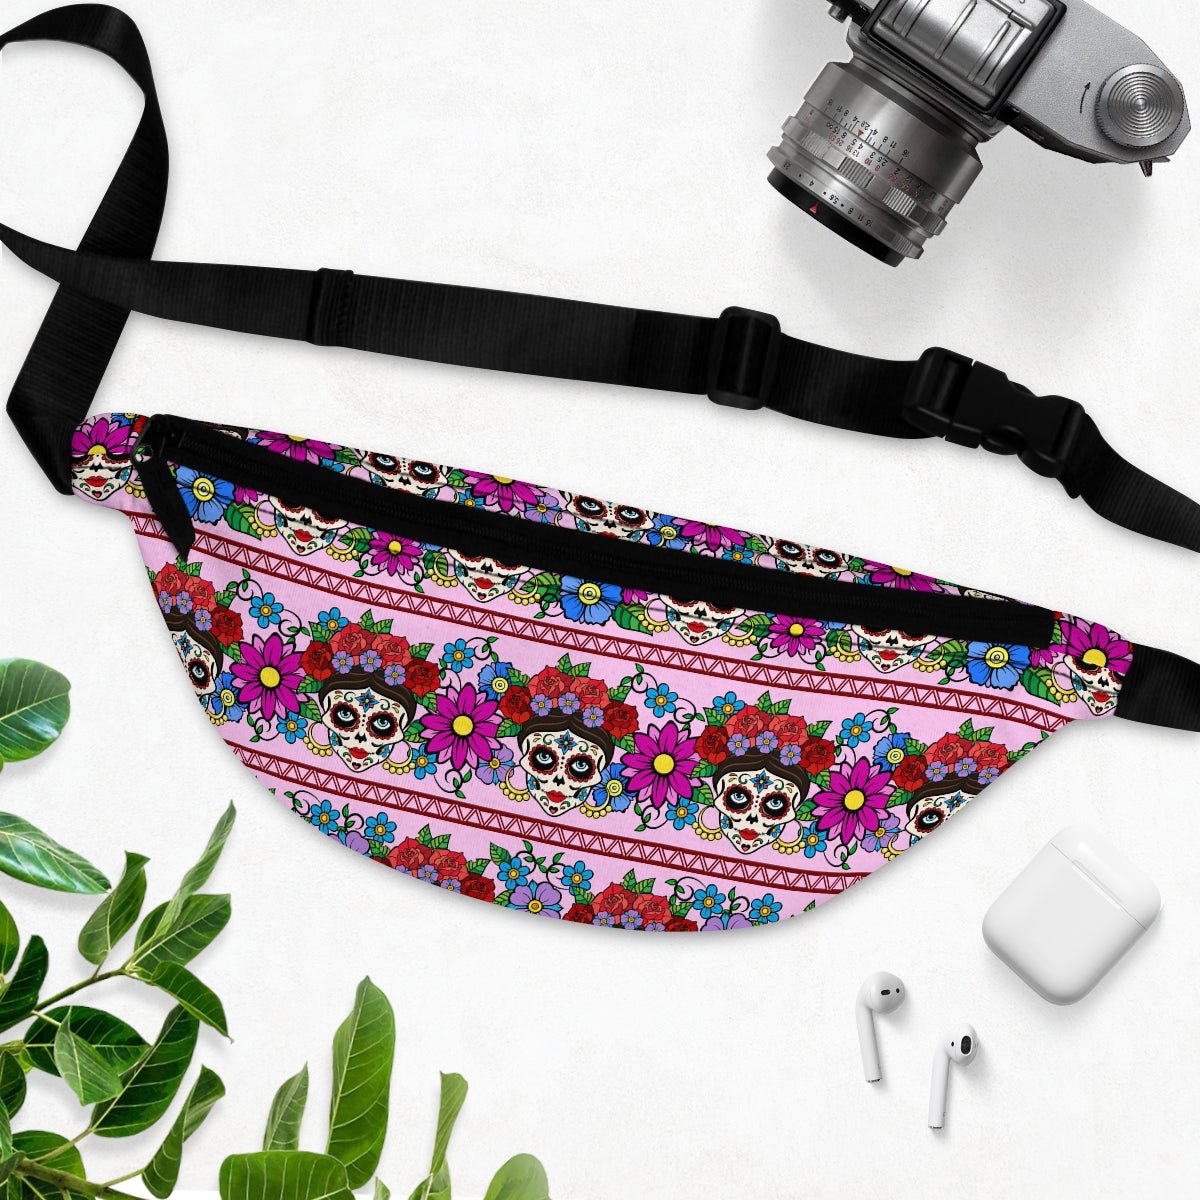 Flowers and Sugar Skulls Fanny Pack - Puffin Lime